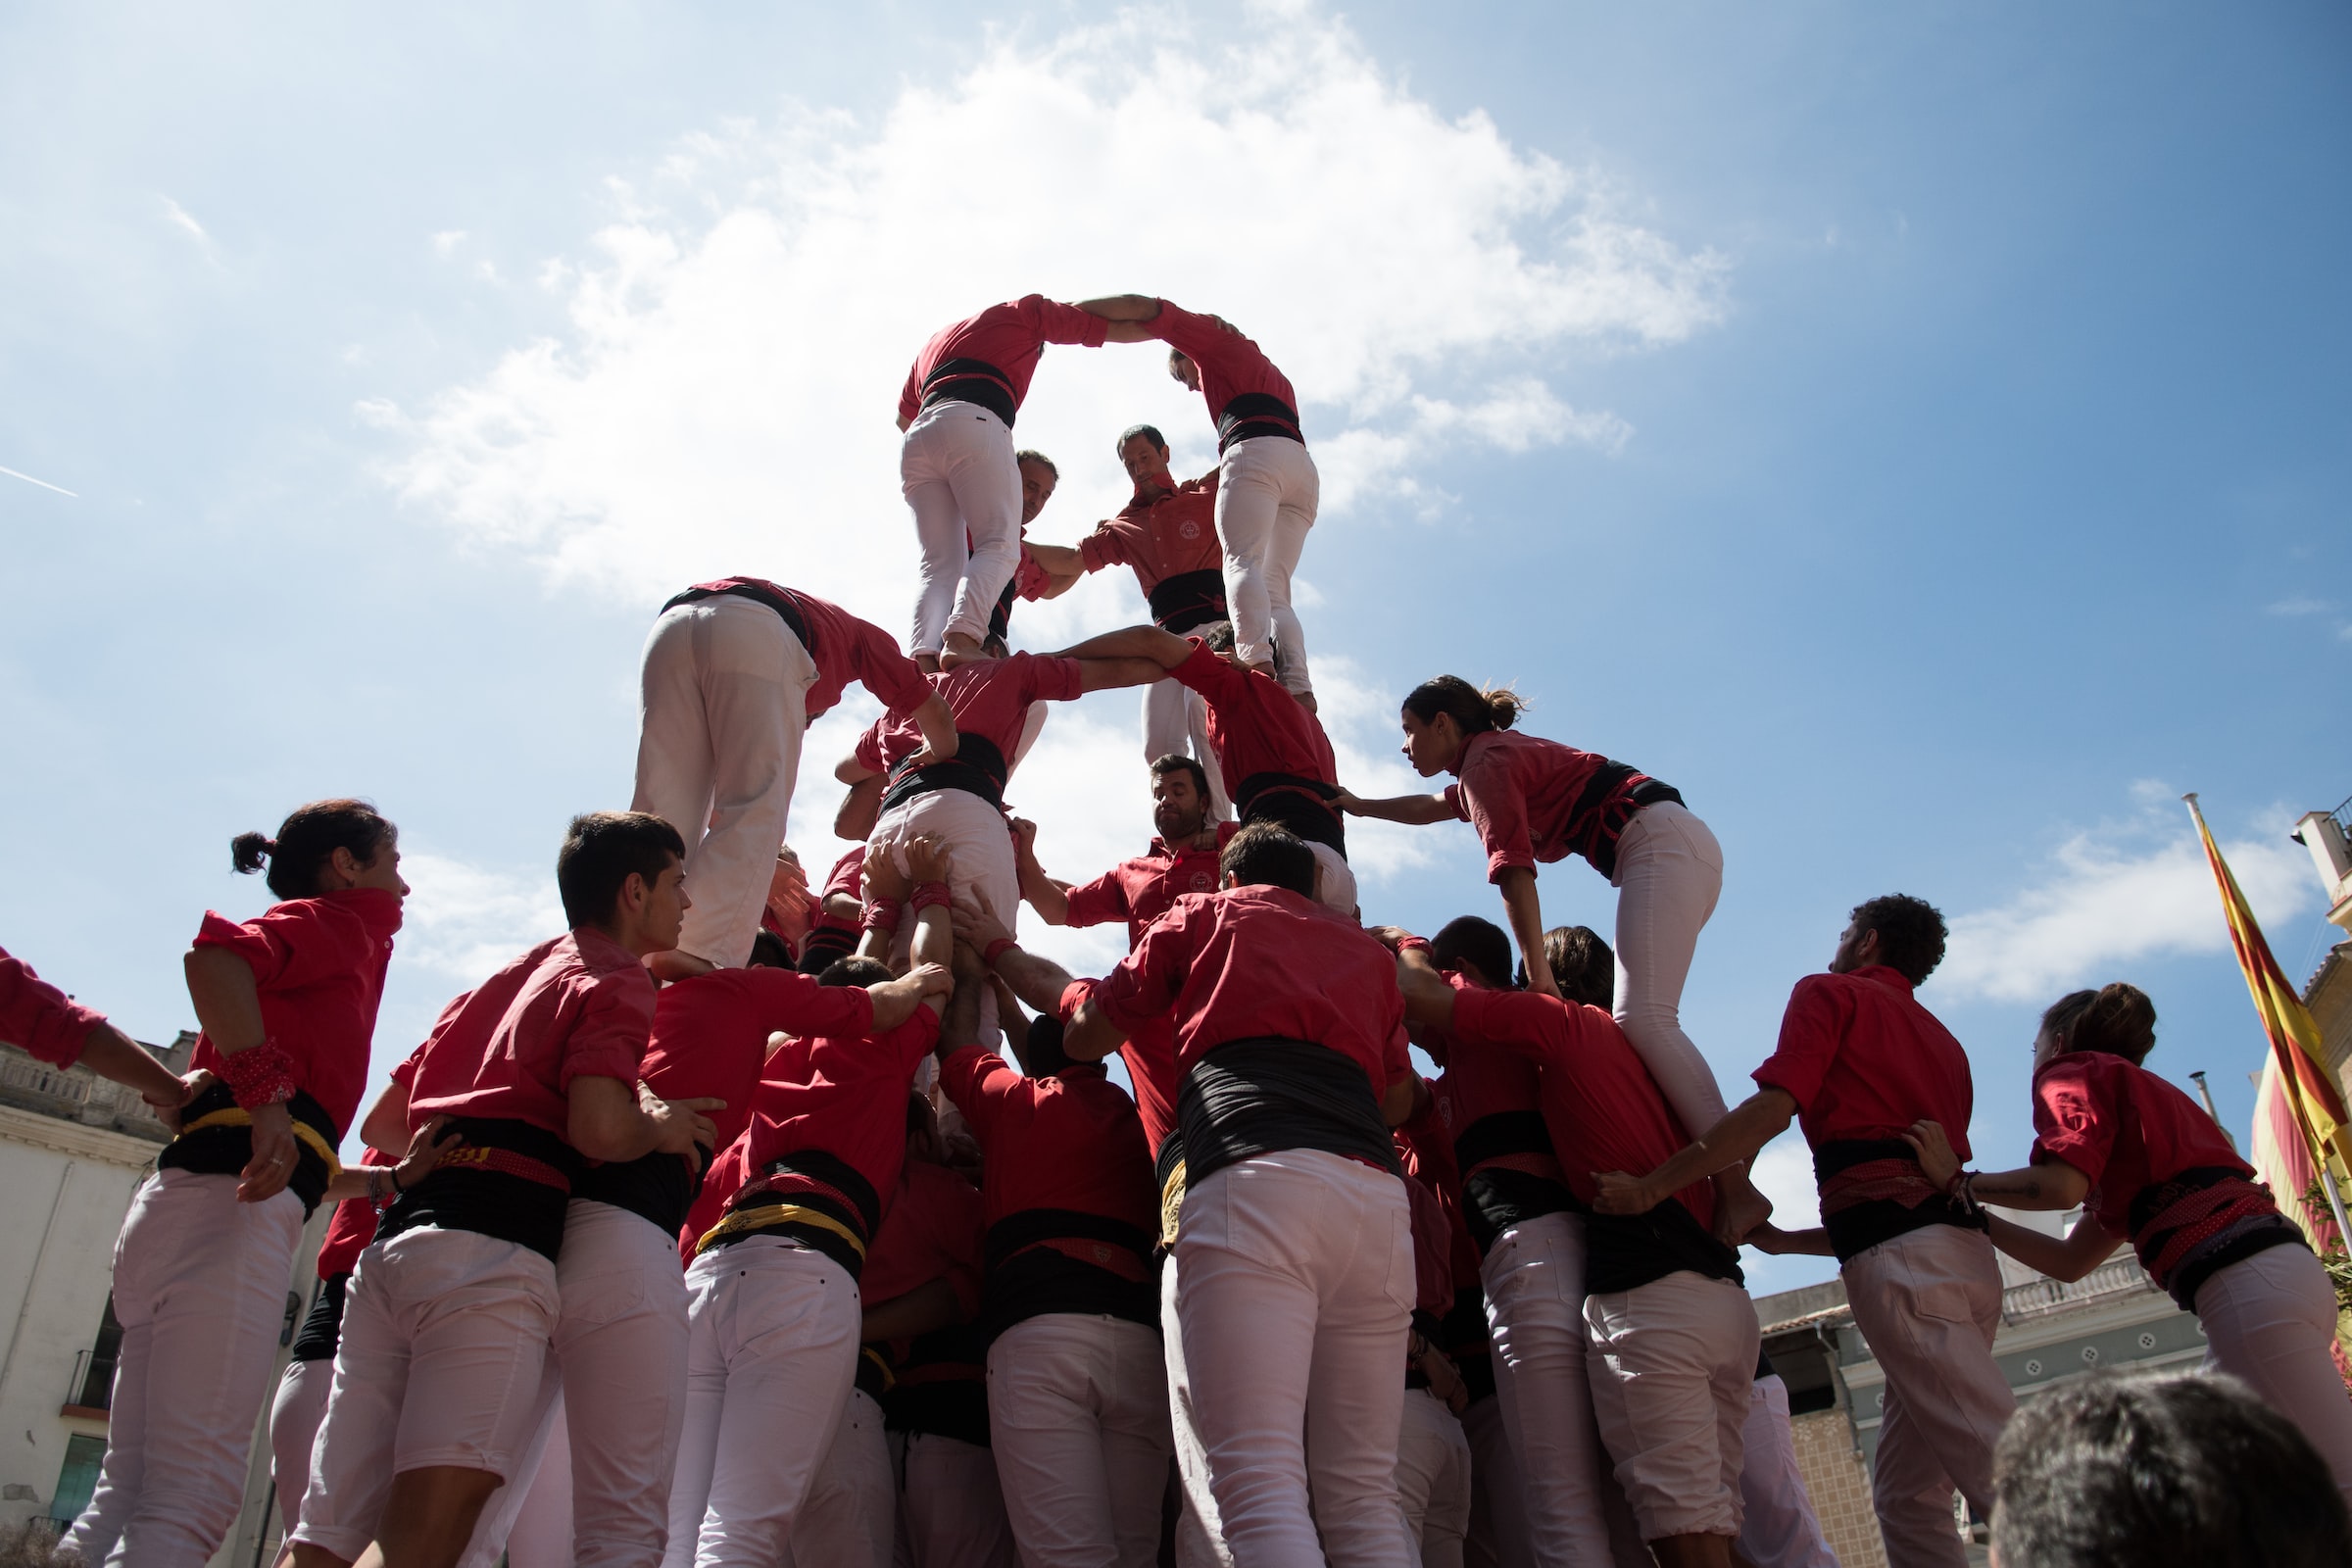 Crowd performs a Castell, known as a human tower, in Spain